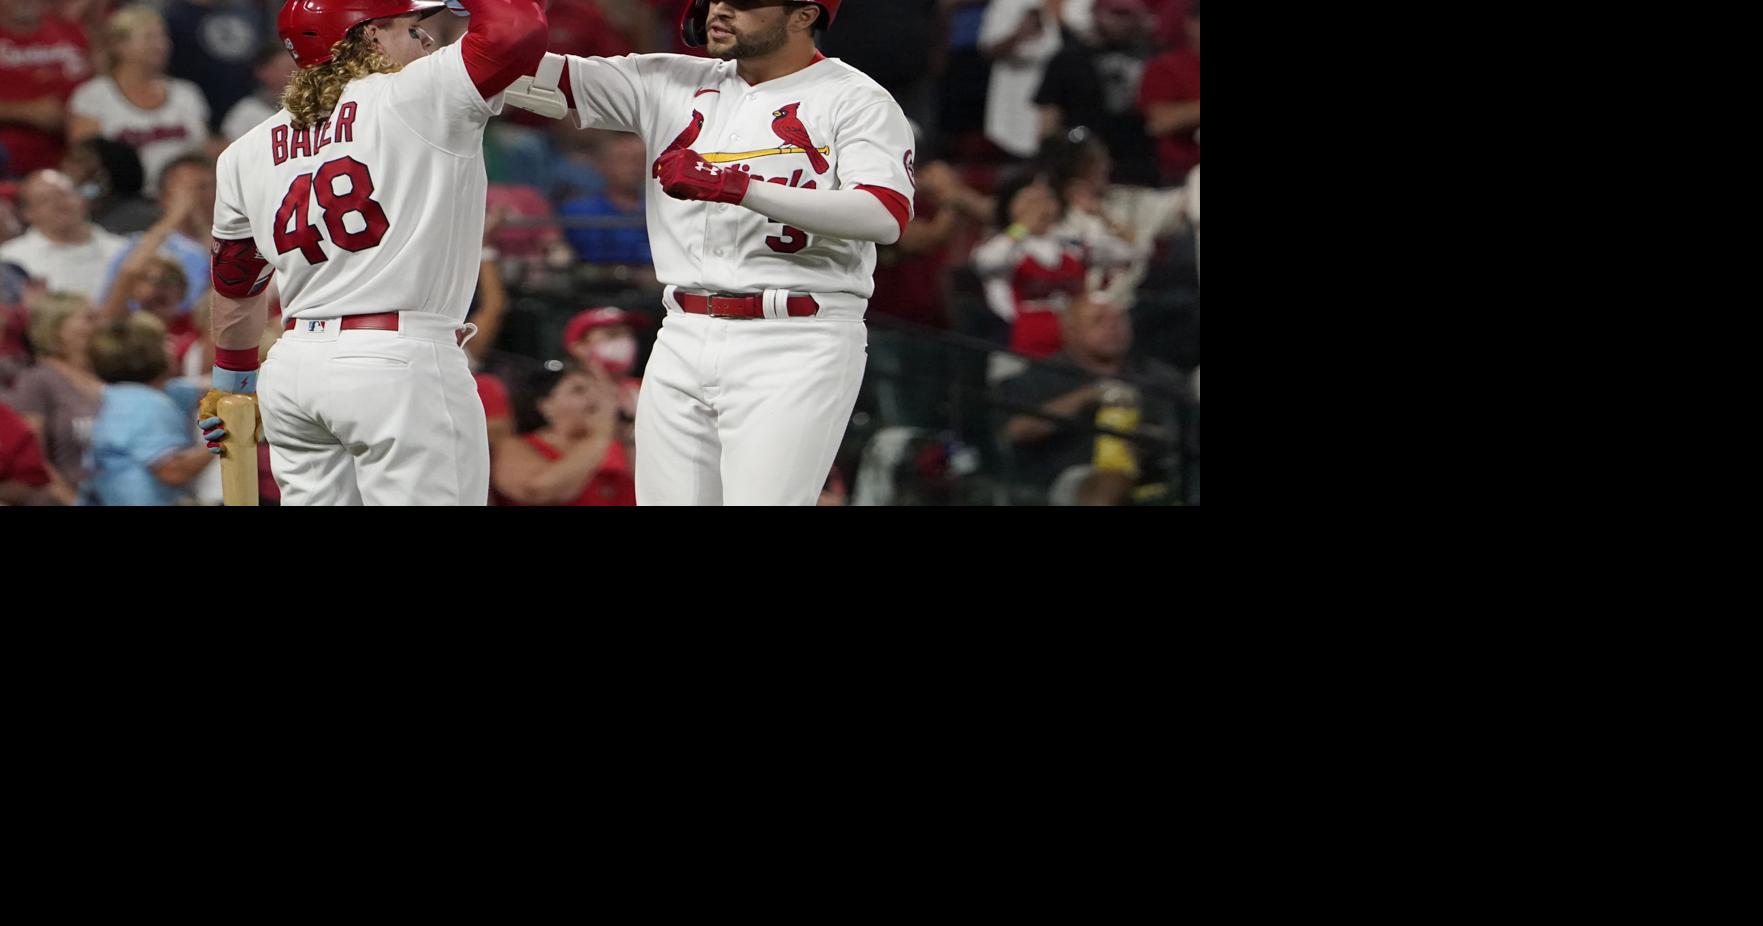 Cardinals beat Brewers for 17th straight victory, clinch wild card berth